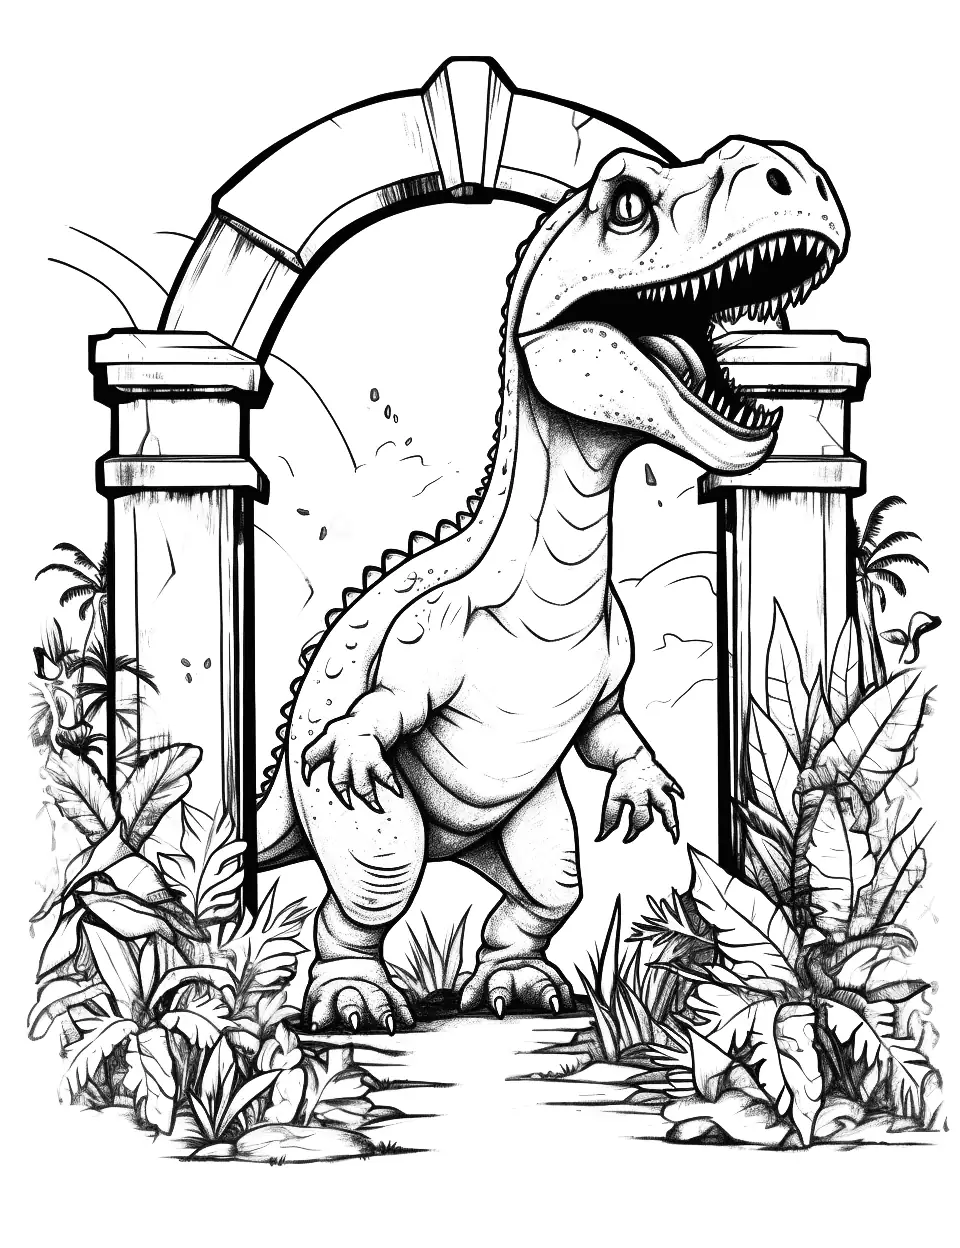 Jurassic World Gates Dinosaur Coloring Page - The iconic gates of Jurassic World with a roaring T-Rex in the background.